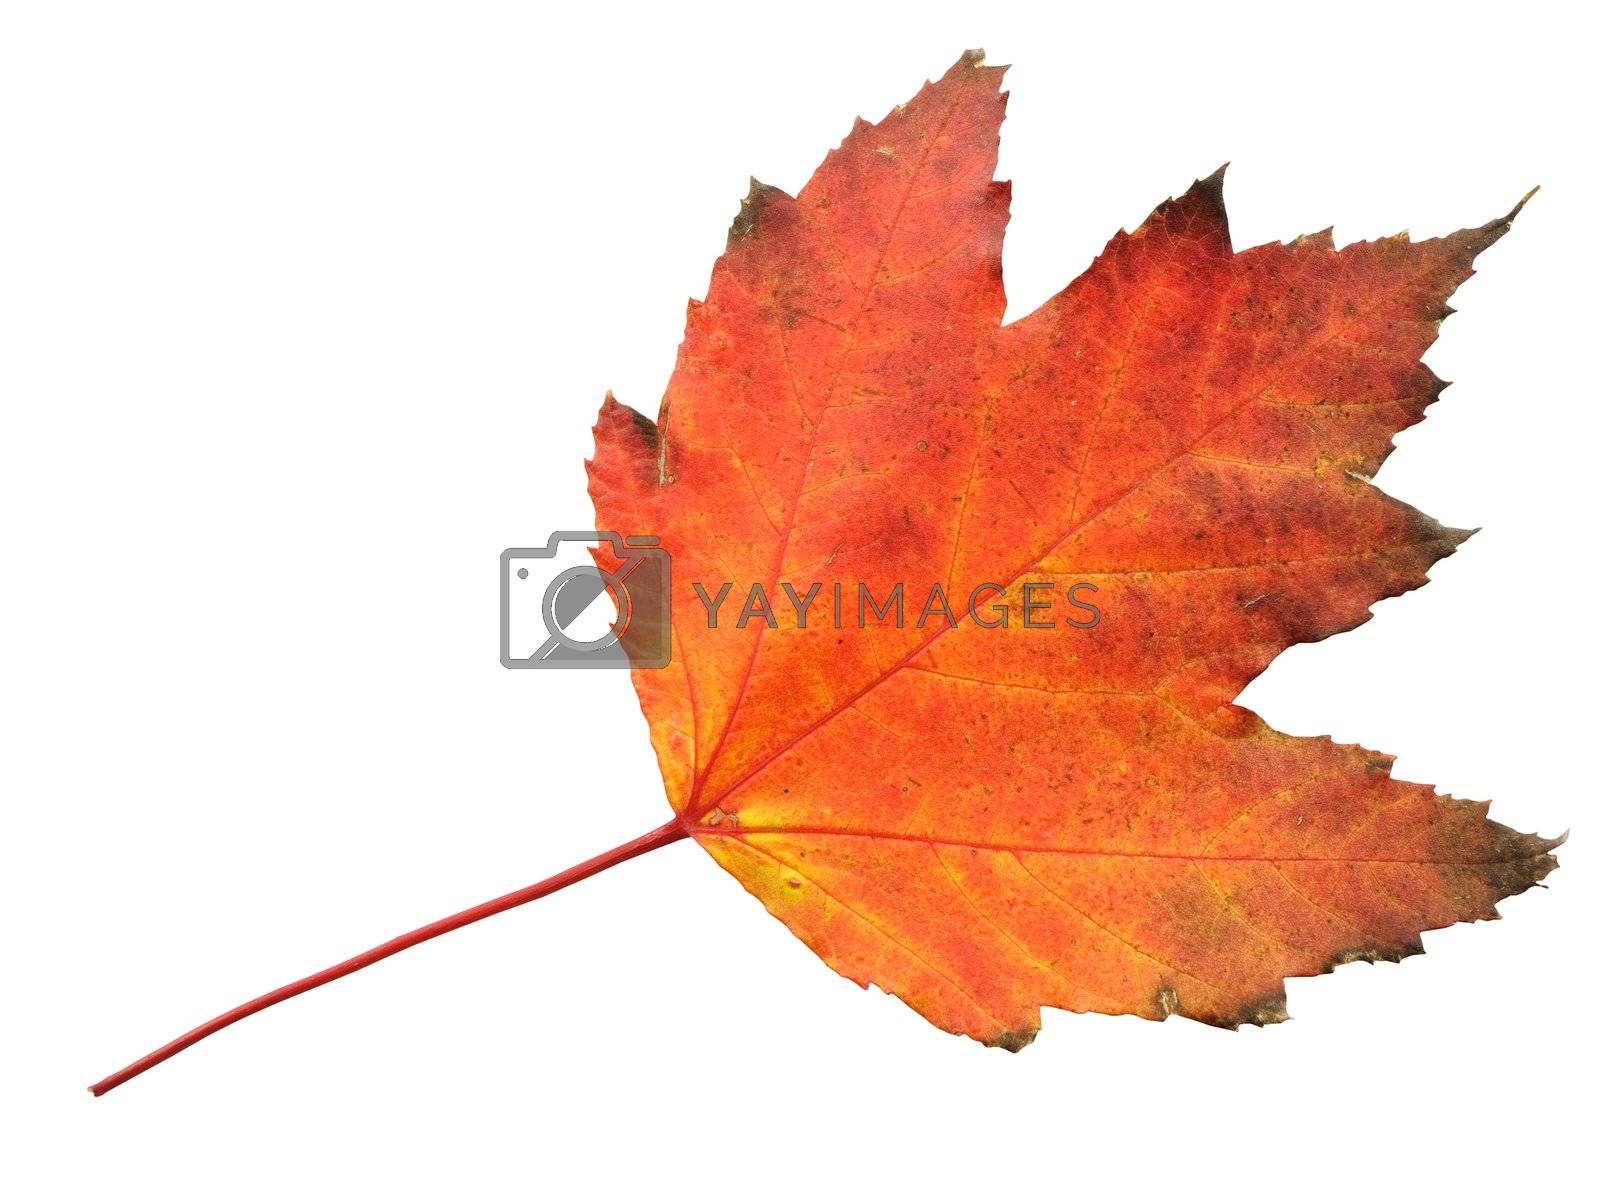 Royalty free image of Autumn Leaf by bhathaway